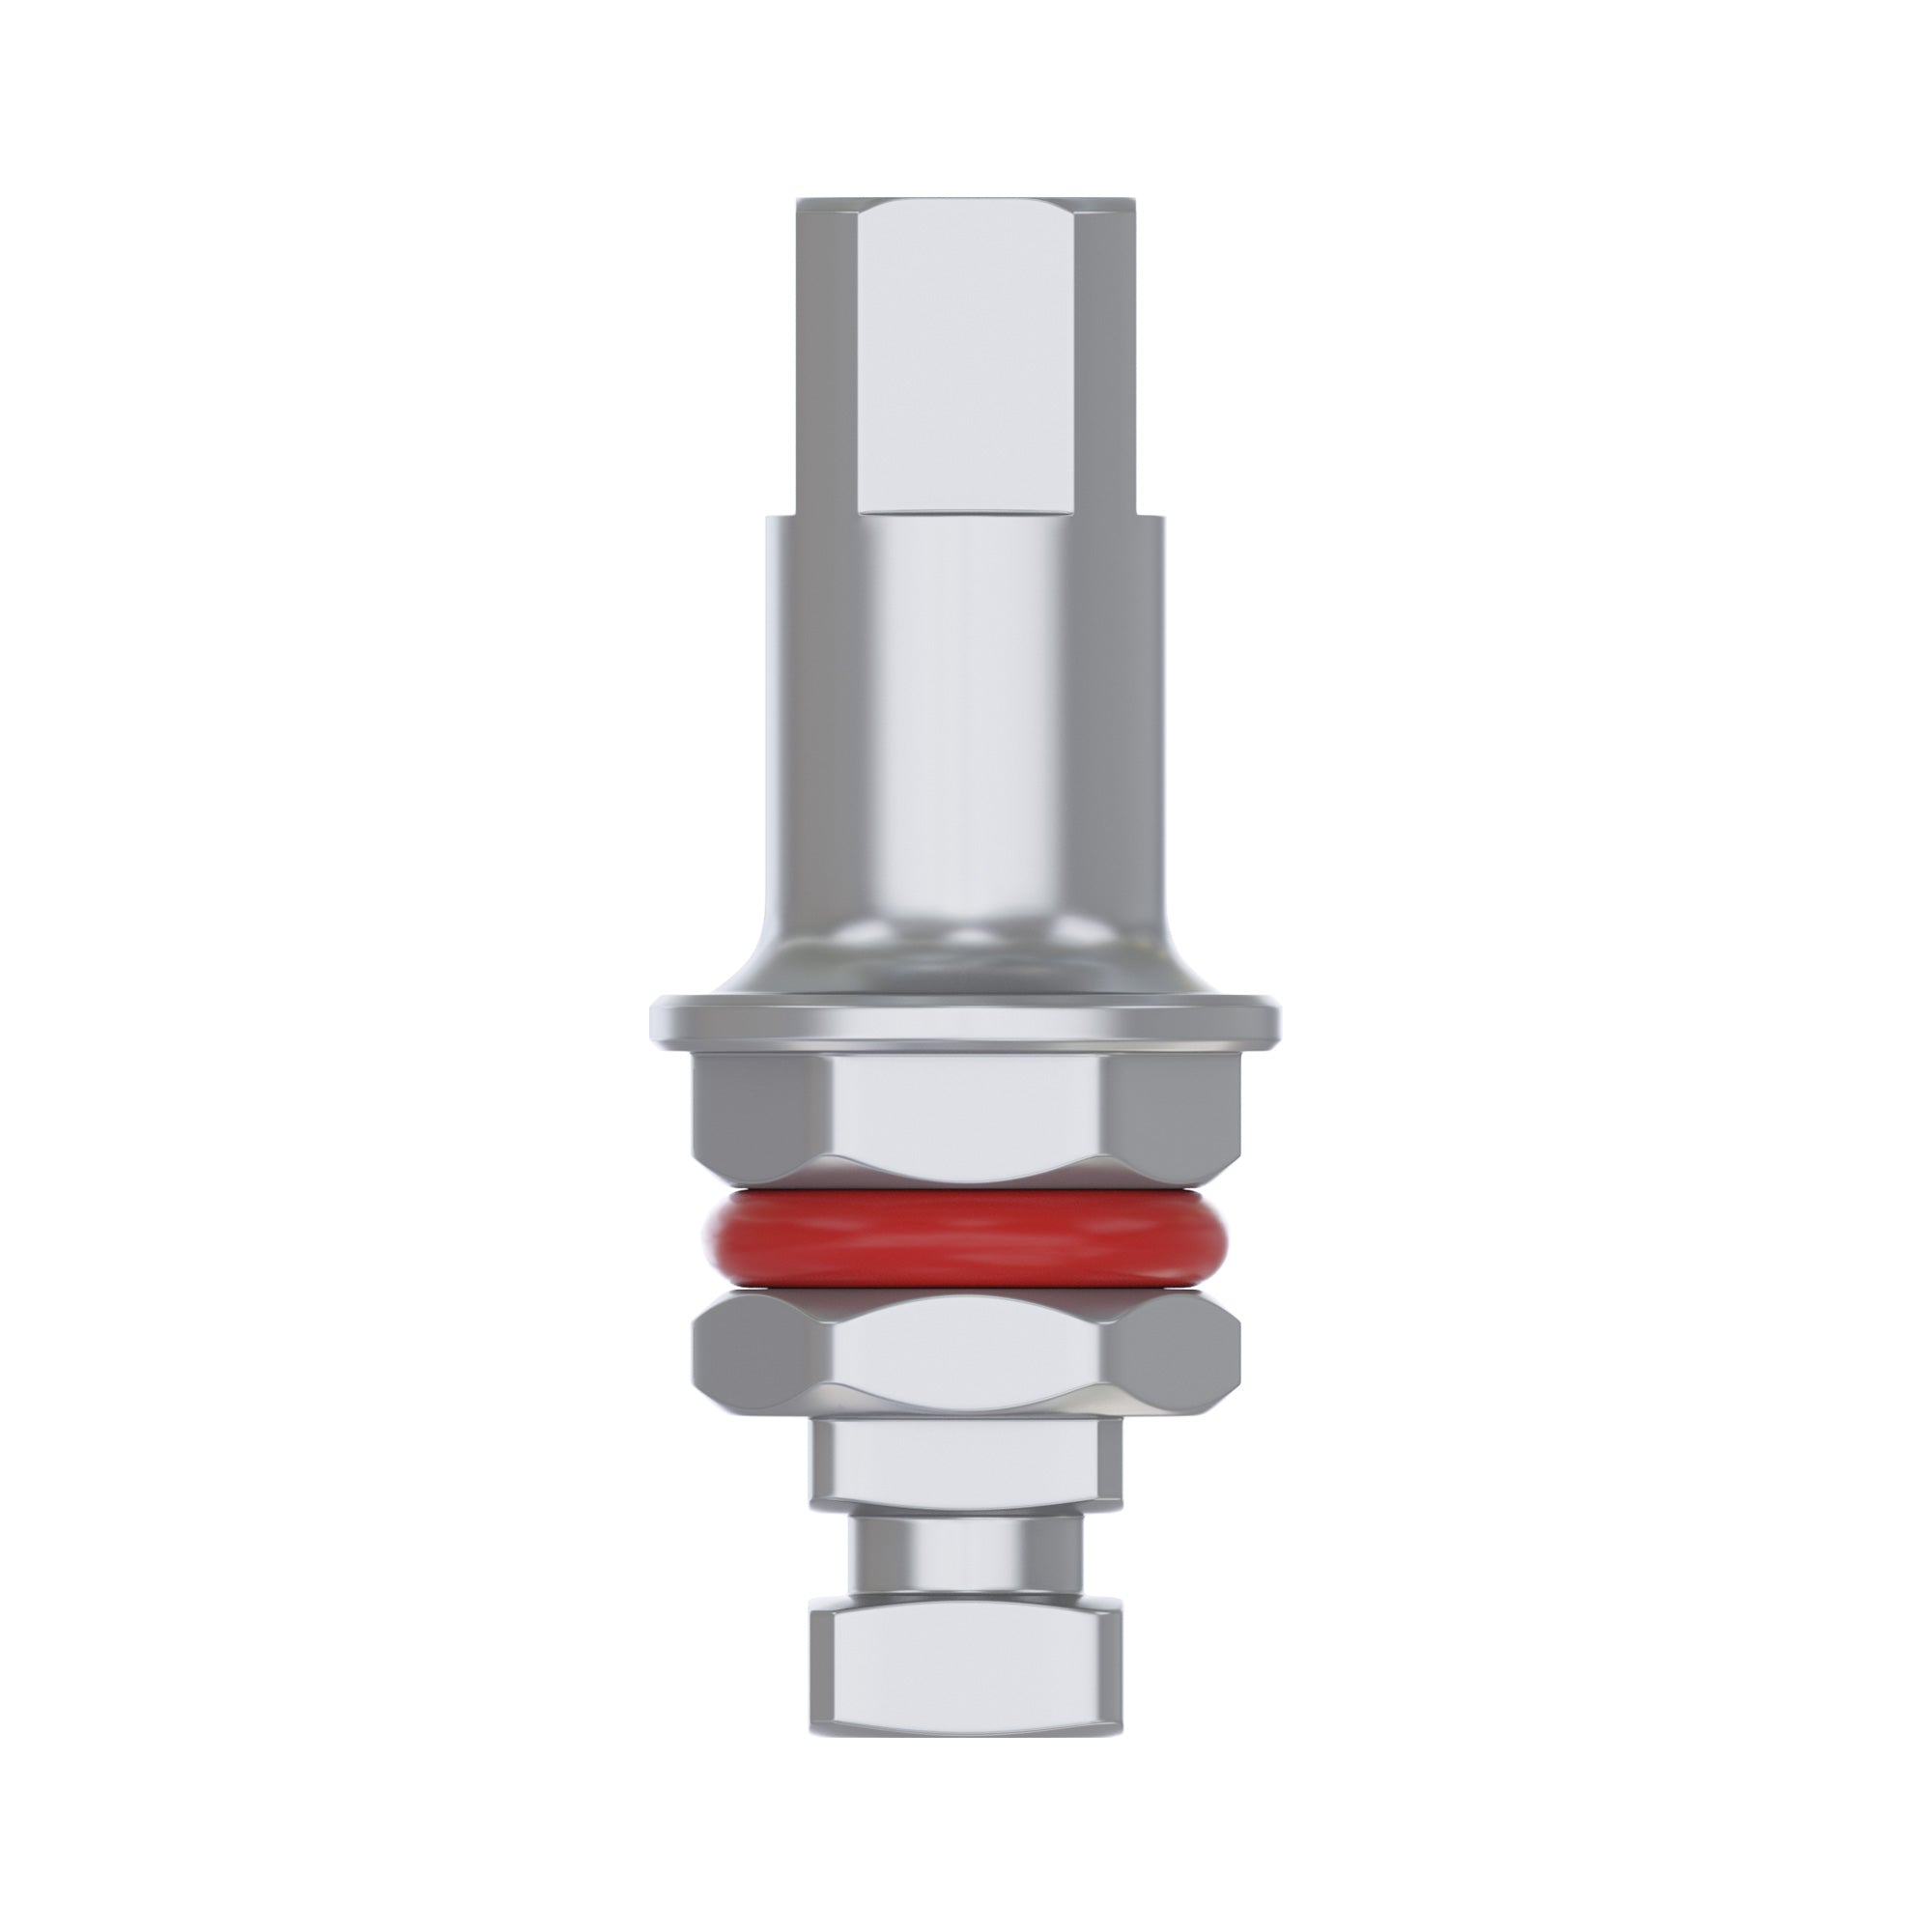 DSI Ratchet Driver For One-piece Implants MC/MCB Series